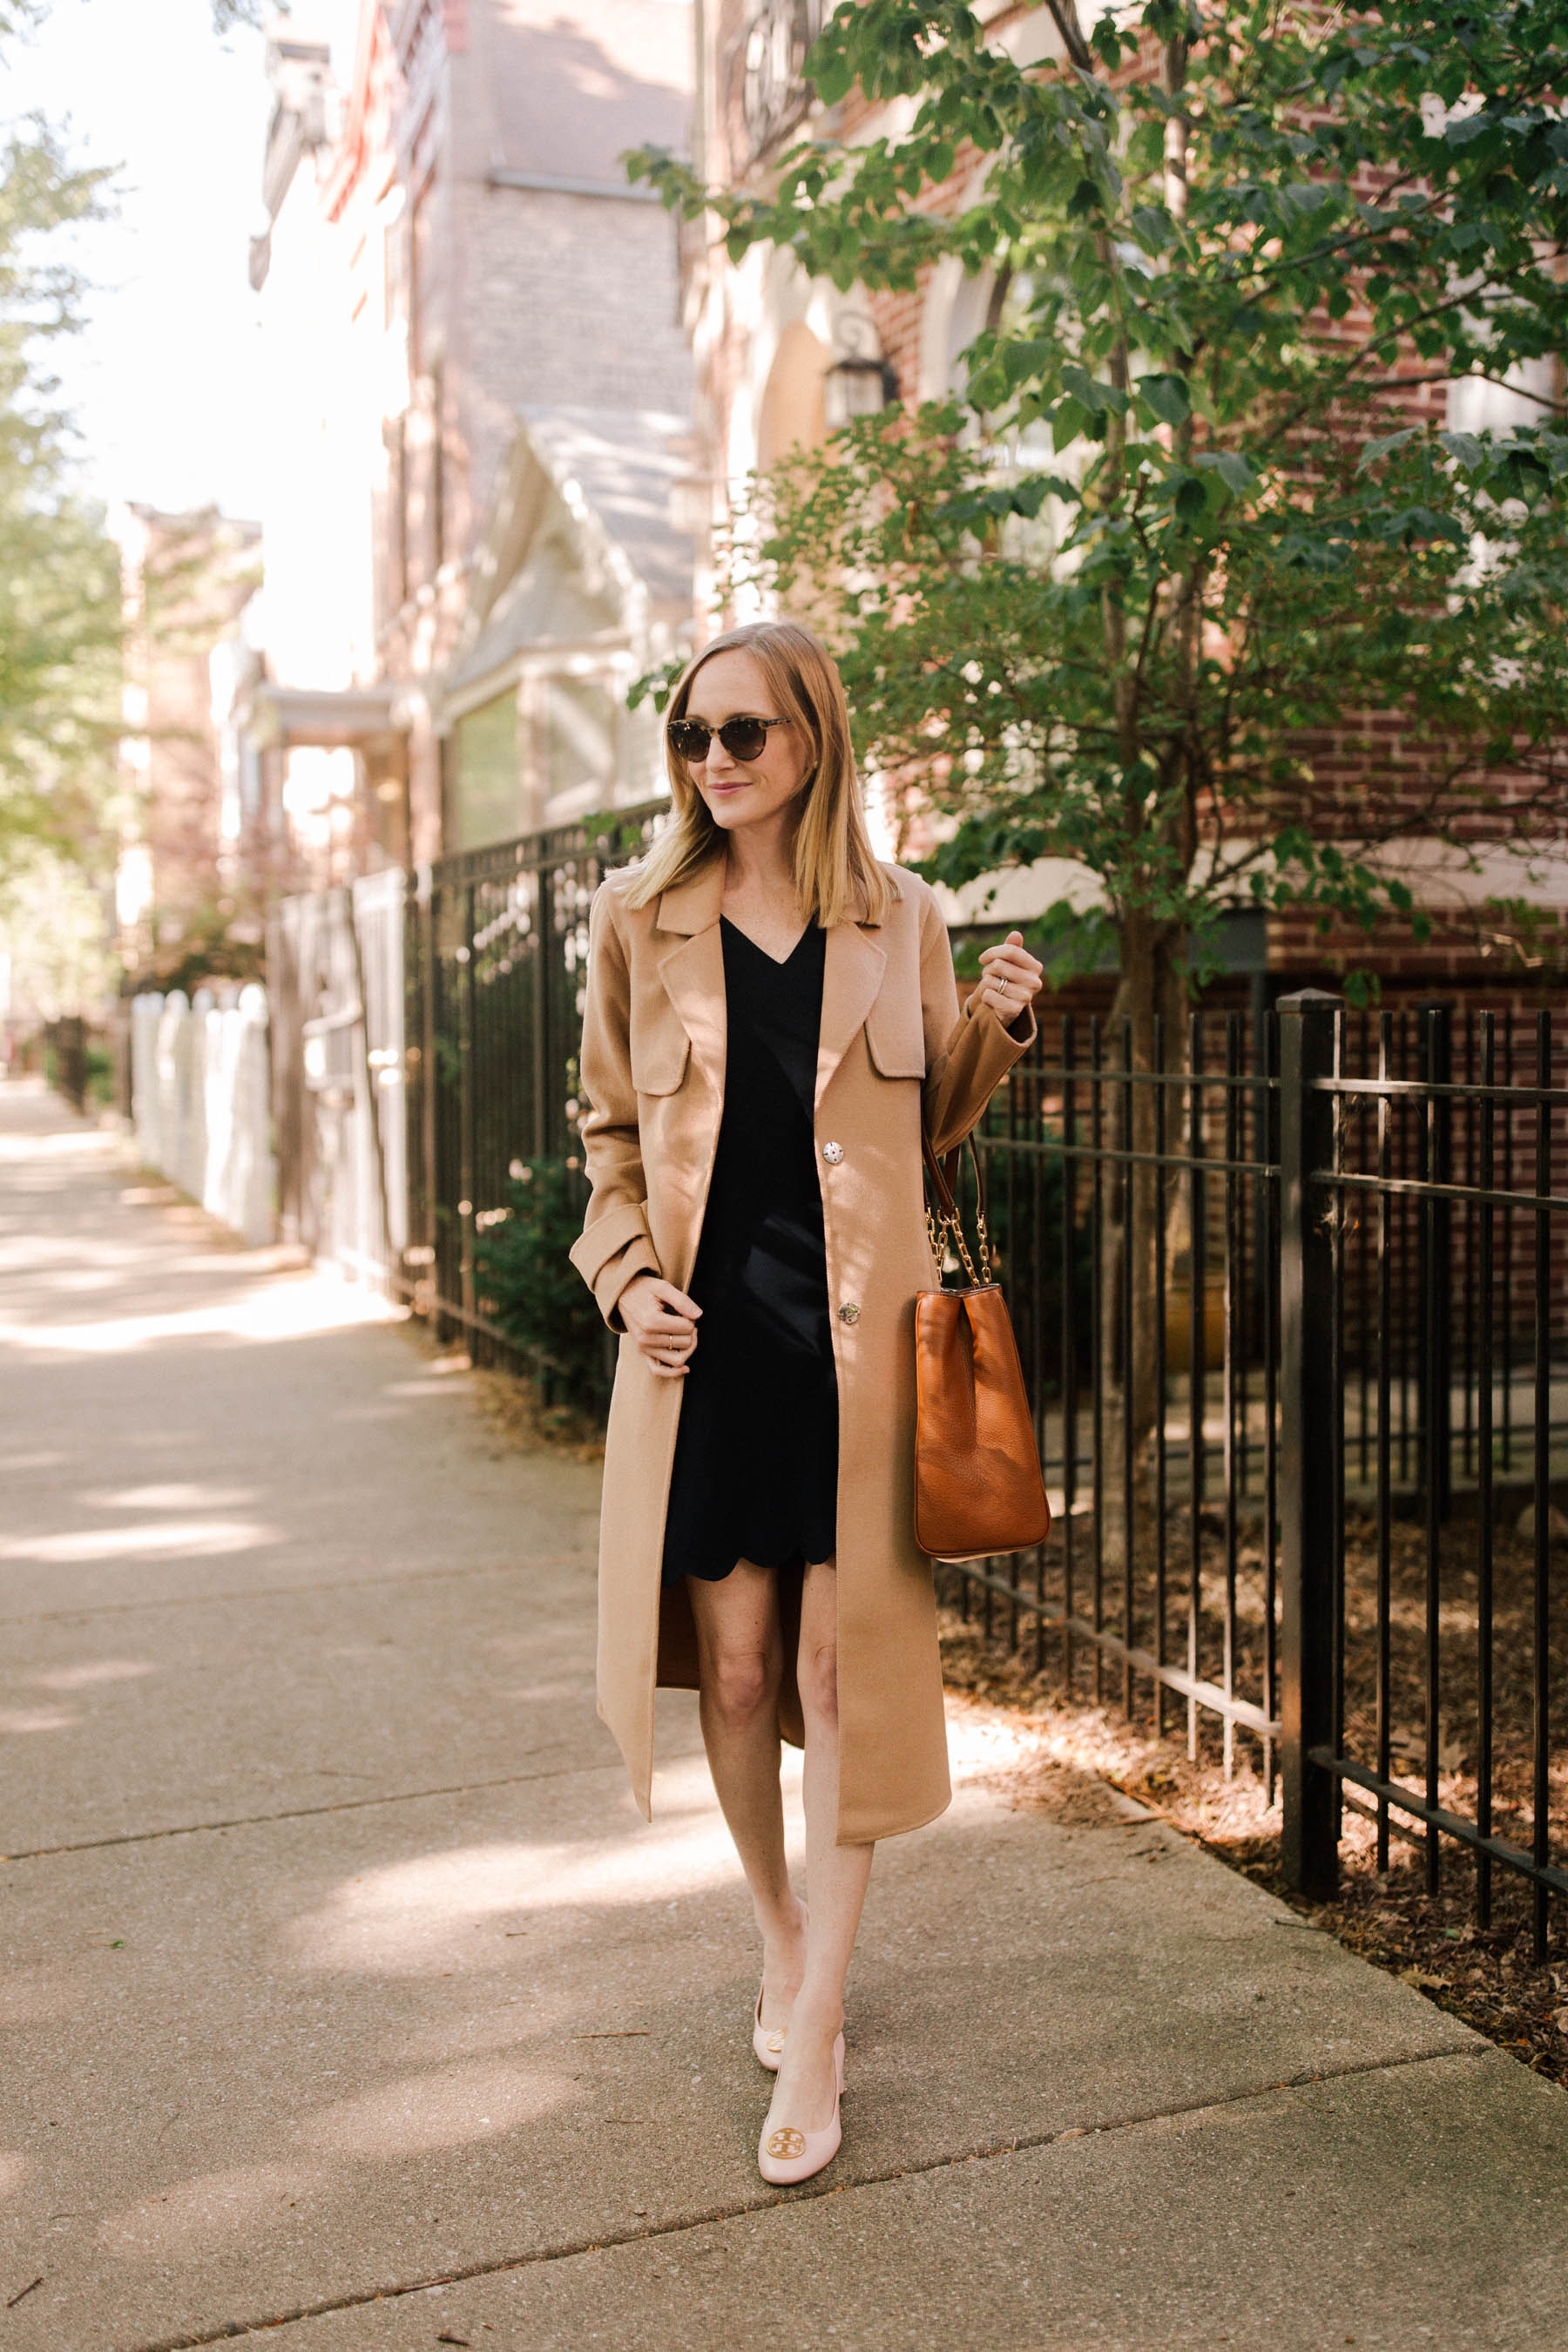 Kenneth Cole Wool Long Camel Coat  / CeCe Scalloped Dress / Tory Burch Benton Pump / Tory Burch Marsden Pebbled Leather Tote